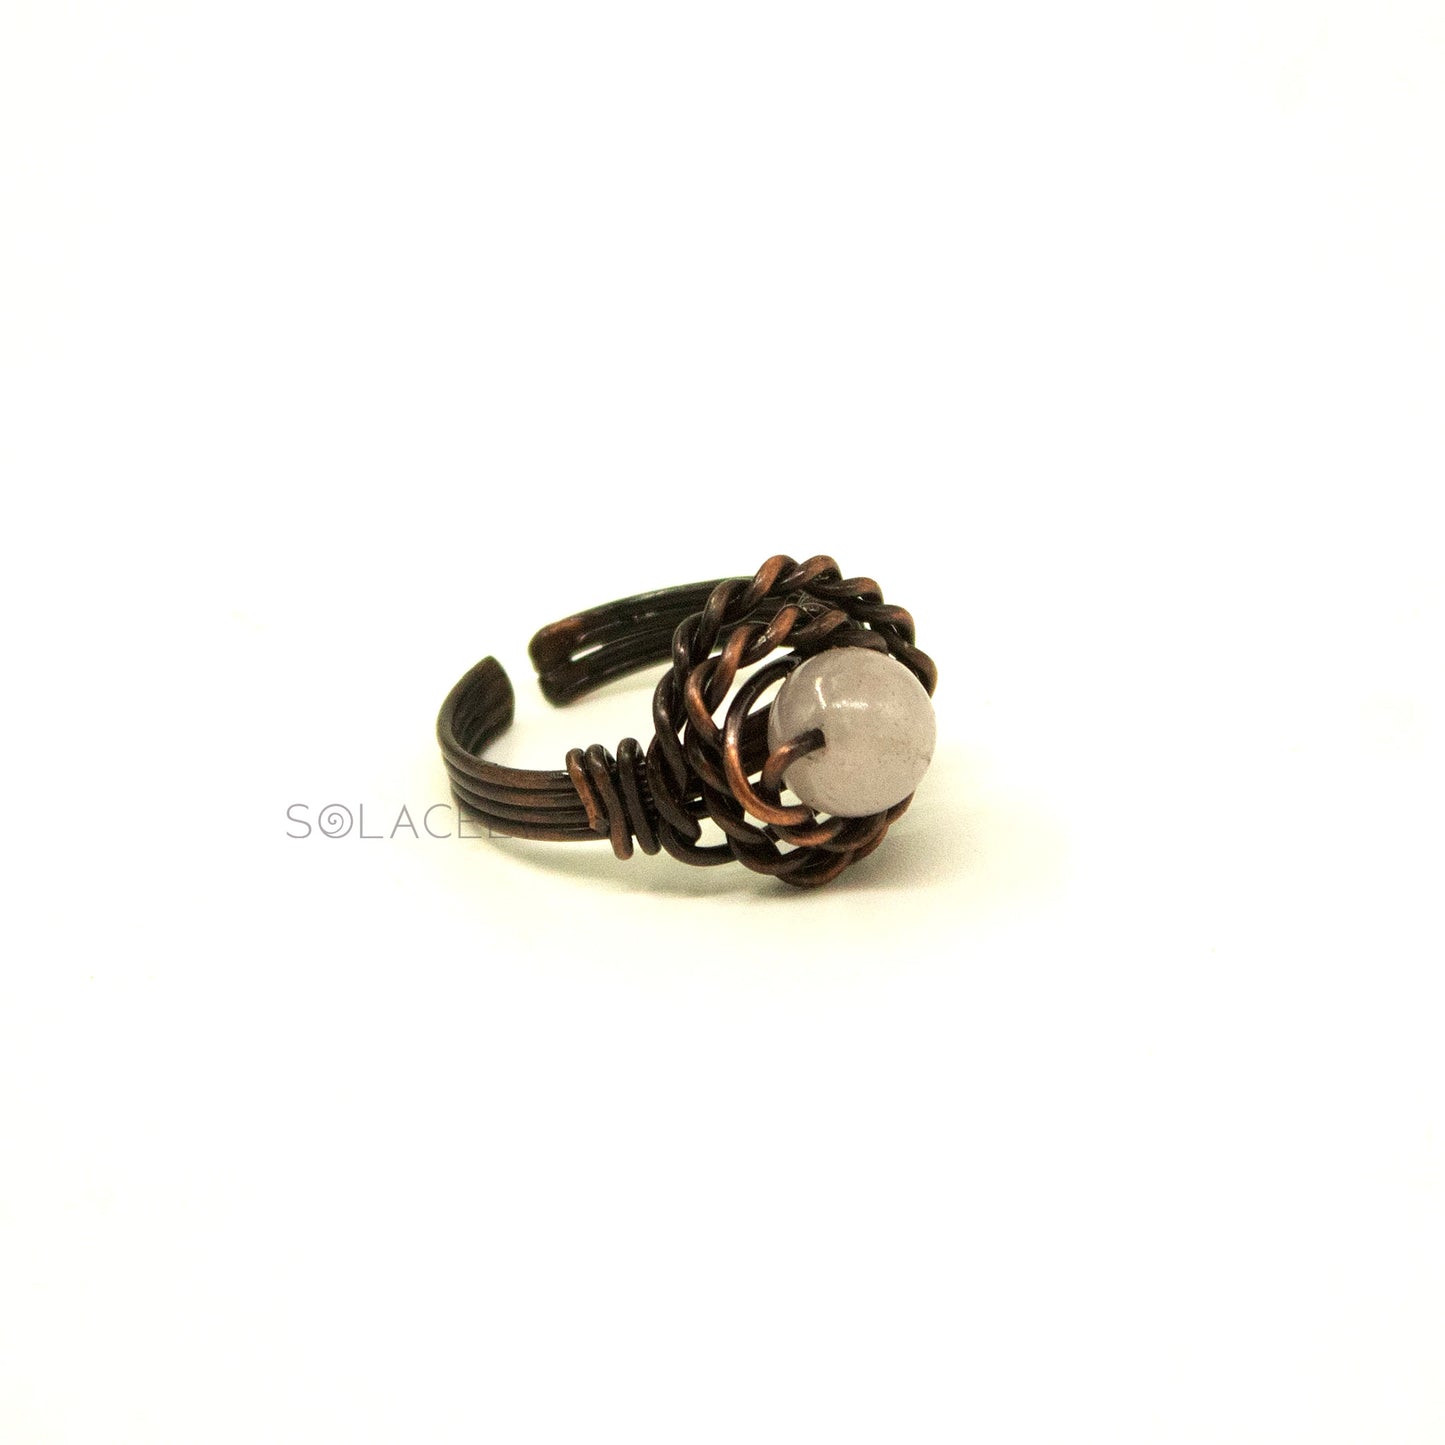 Antique Copper Wire Wrapped Ring with Rose Quartz Stone